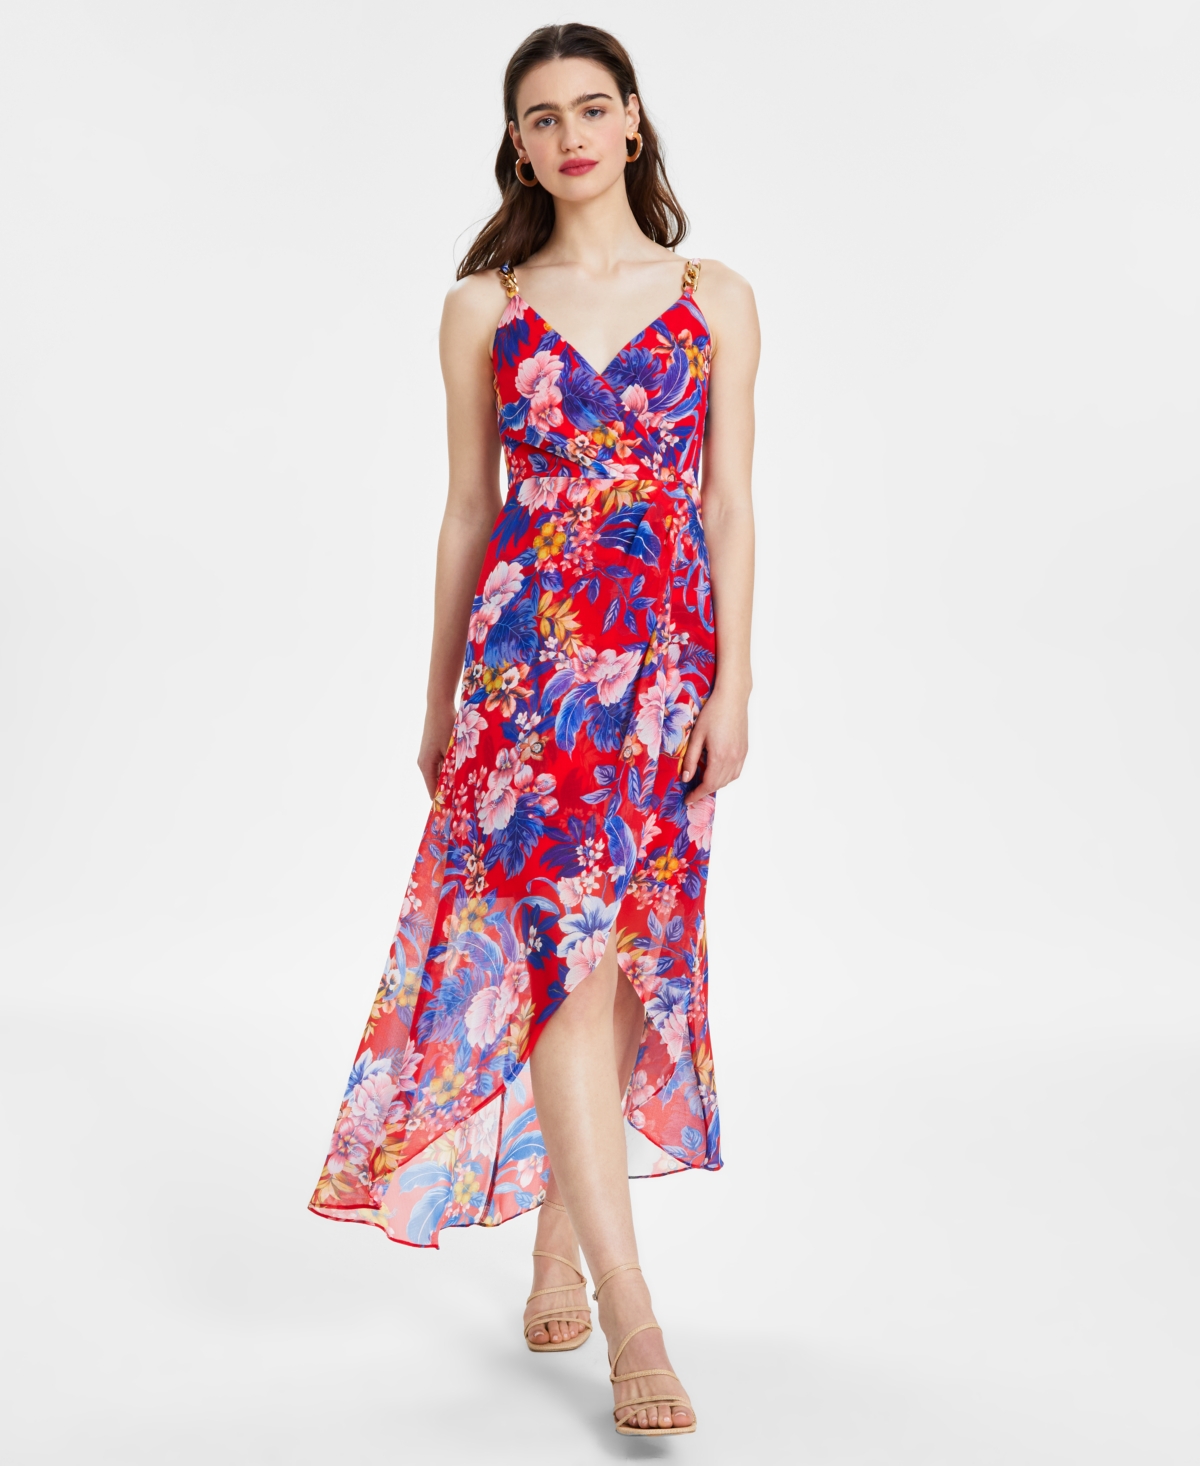 Women's Floral Print Sleeveless High-Low Maxi Dress - Red Multi